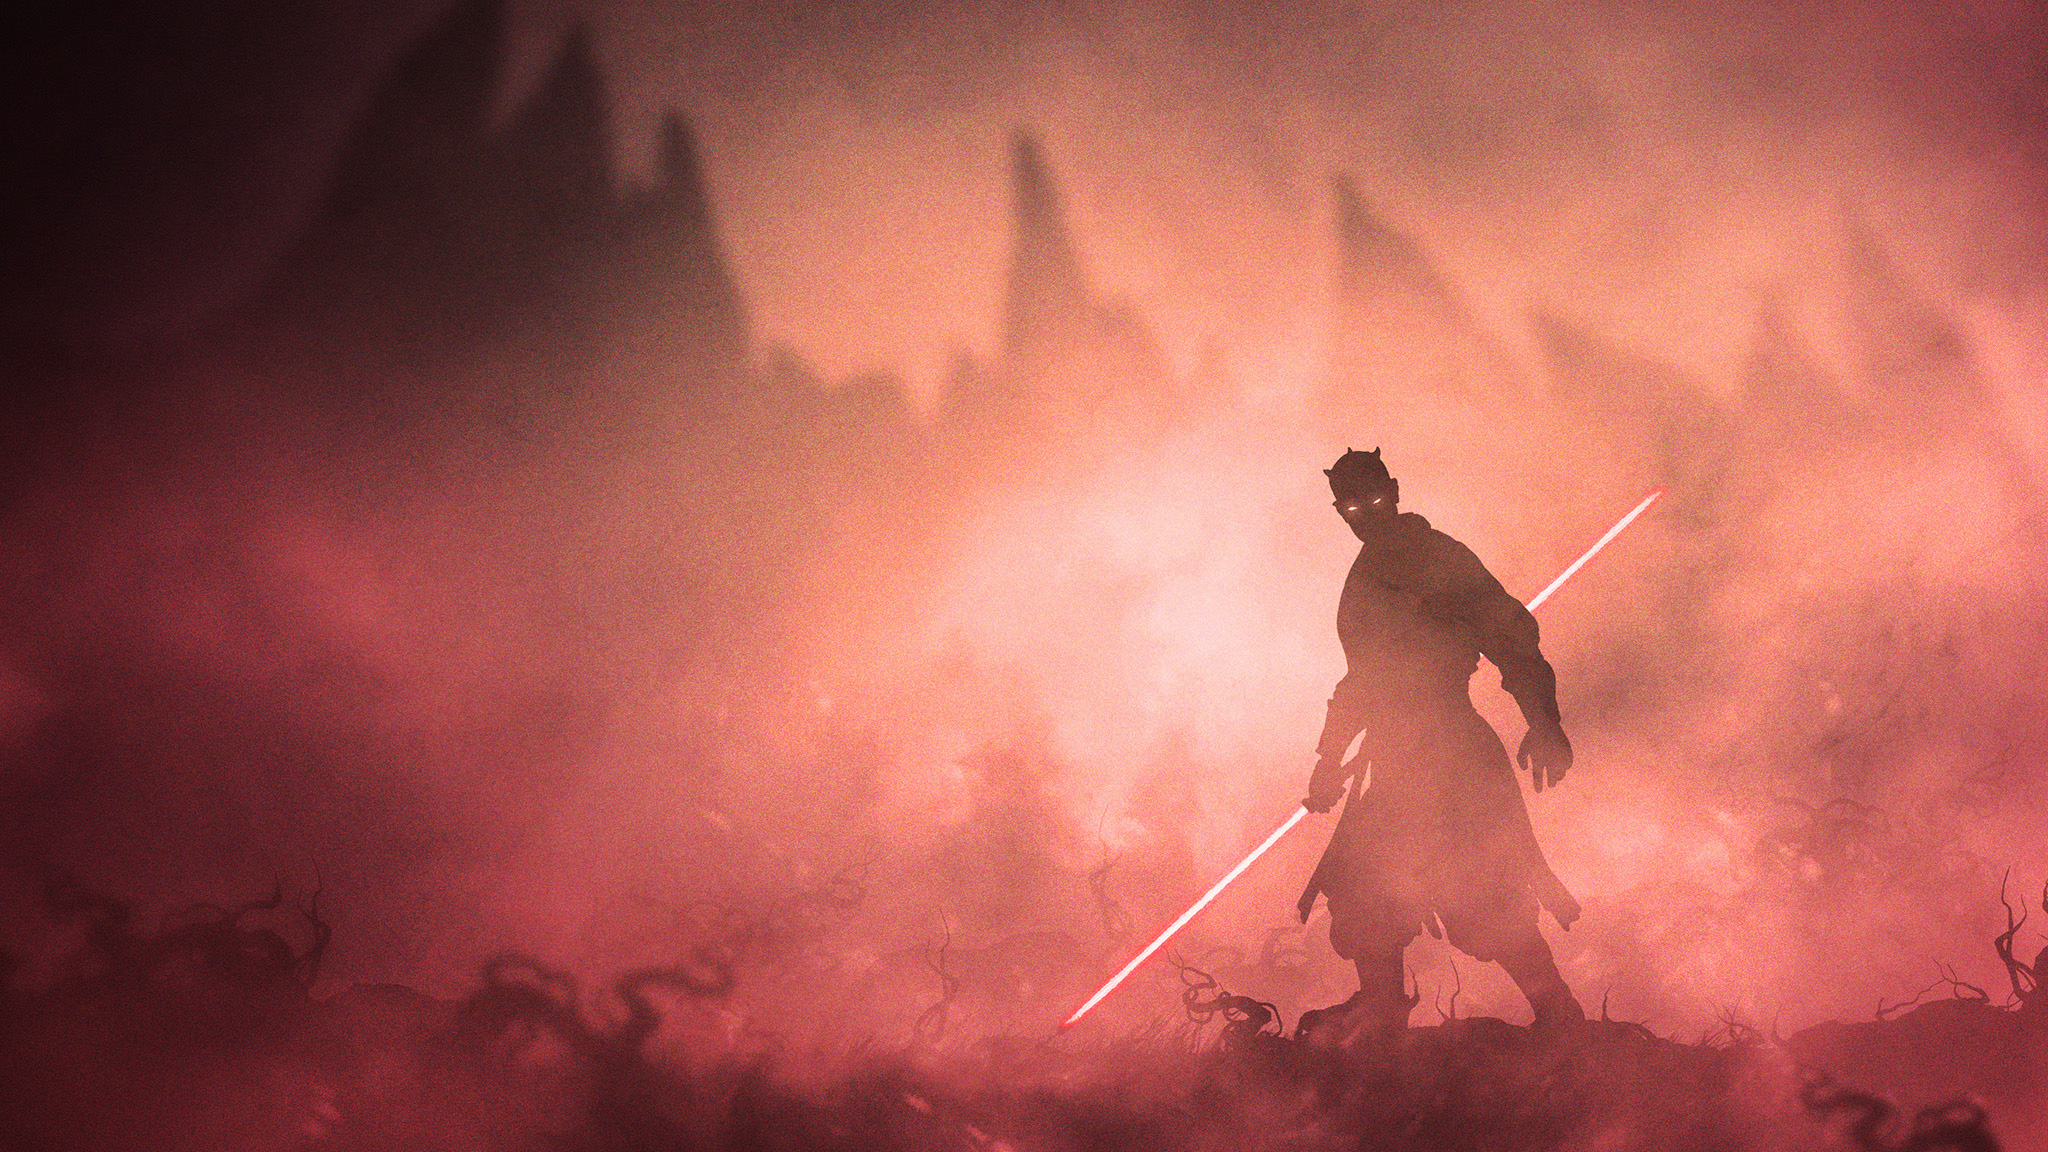 Darth Maul Digital Art, HD Artist, 4k Wallpaper, Image, Background, Photo and Picture